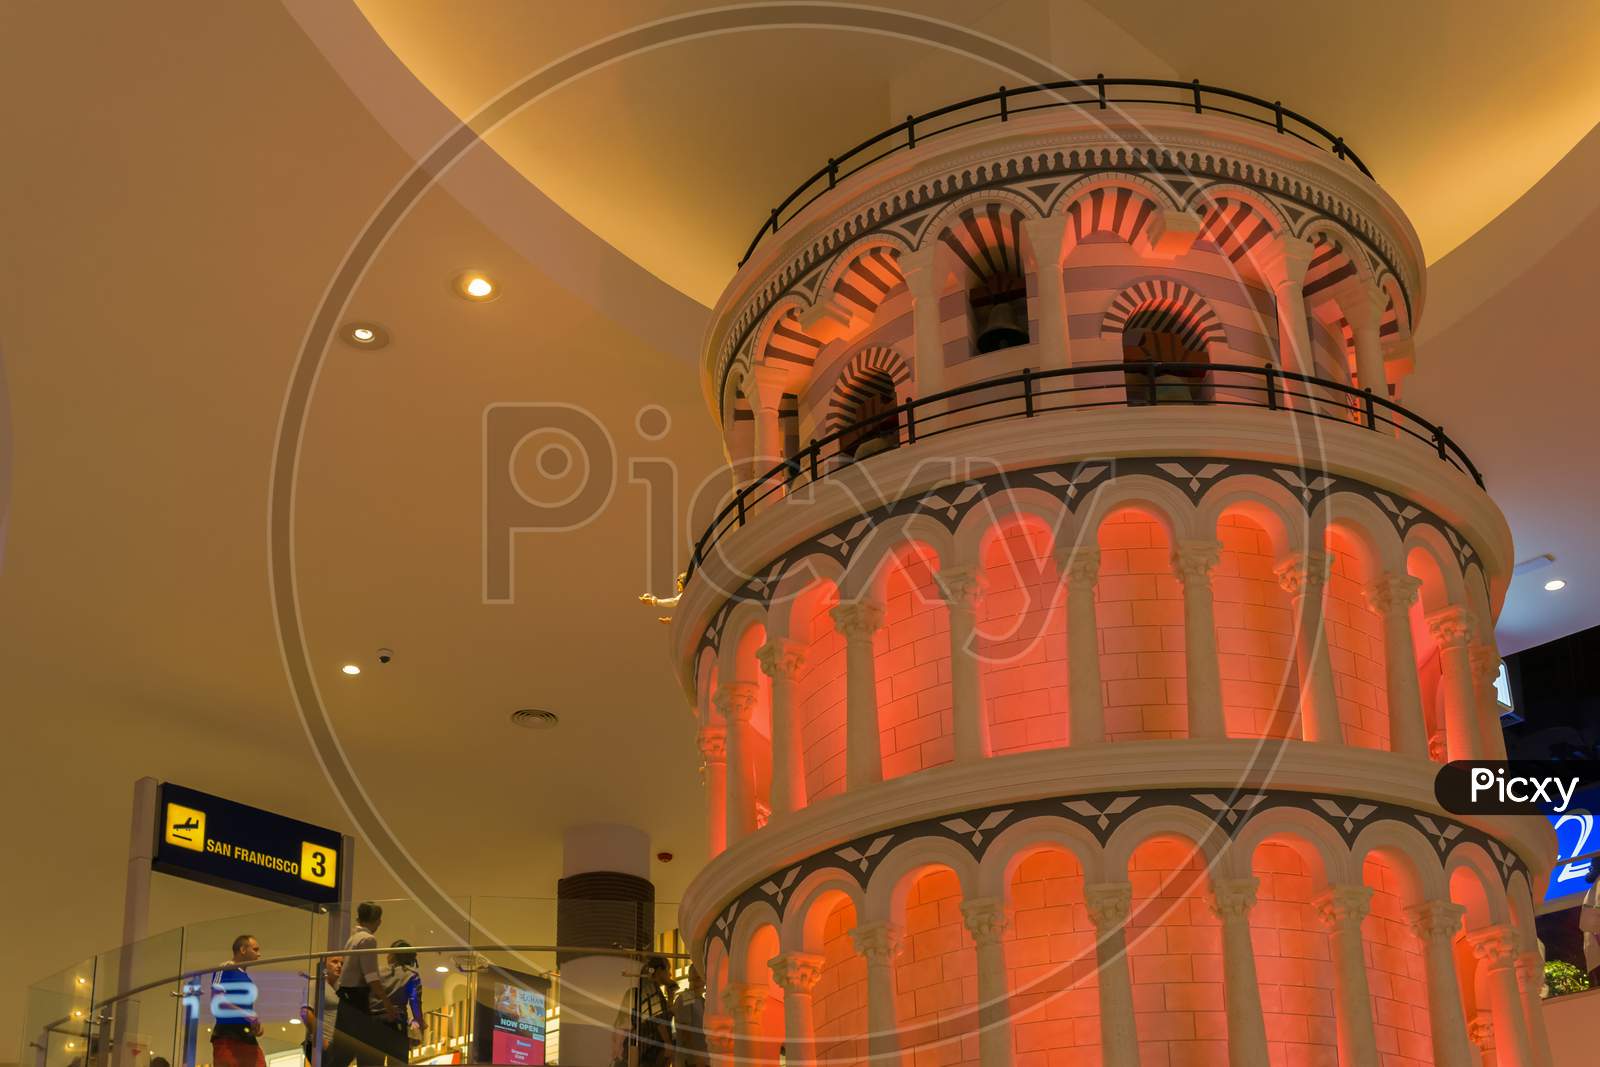 Pattaya,Thailand - October 19,2018: Terminal 21 This Is A Smaller Replica Of The Pisa Tower.It Reaches From The Ground Floor To The Roof.Terminal 21 Is A Big,Modern Shopping Mall With Many Shops And Restaurants.